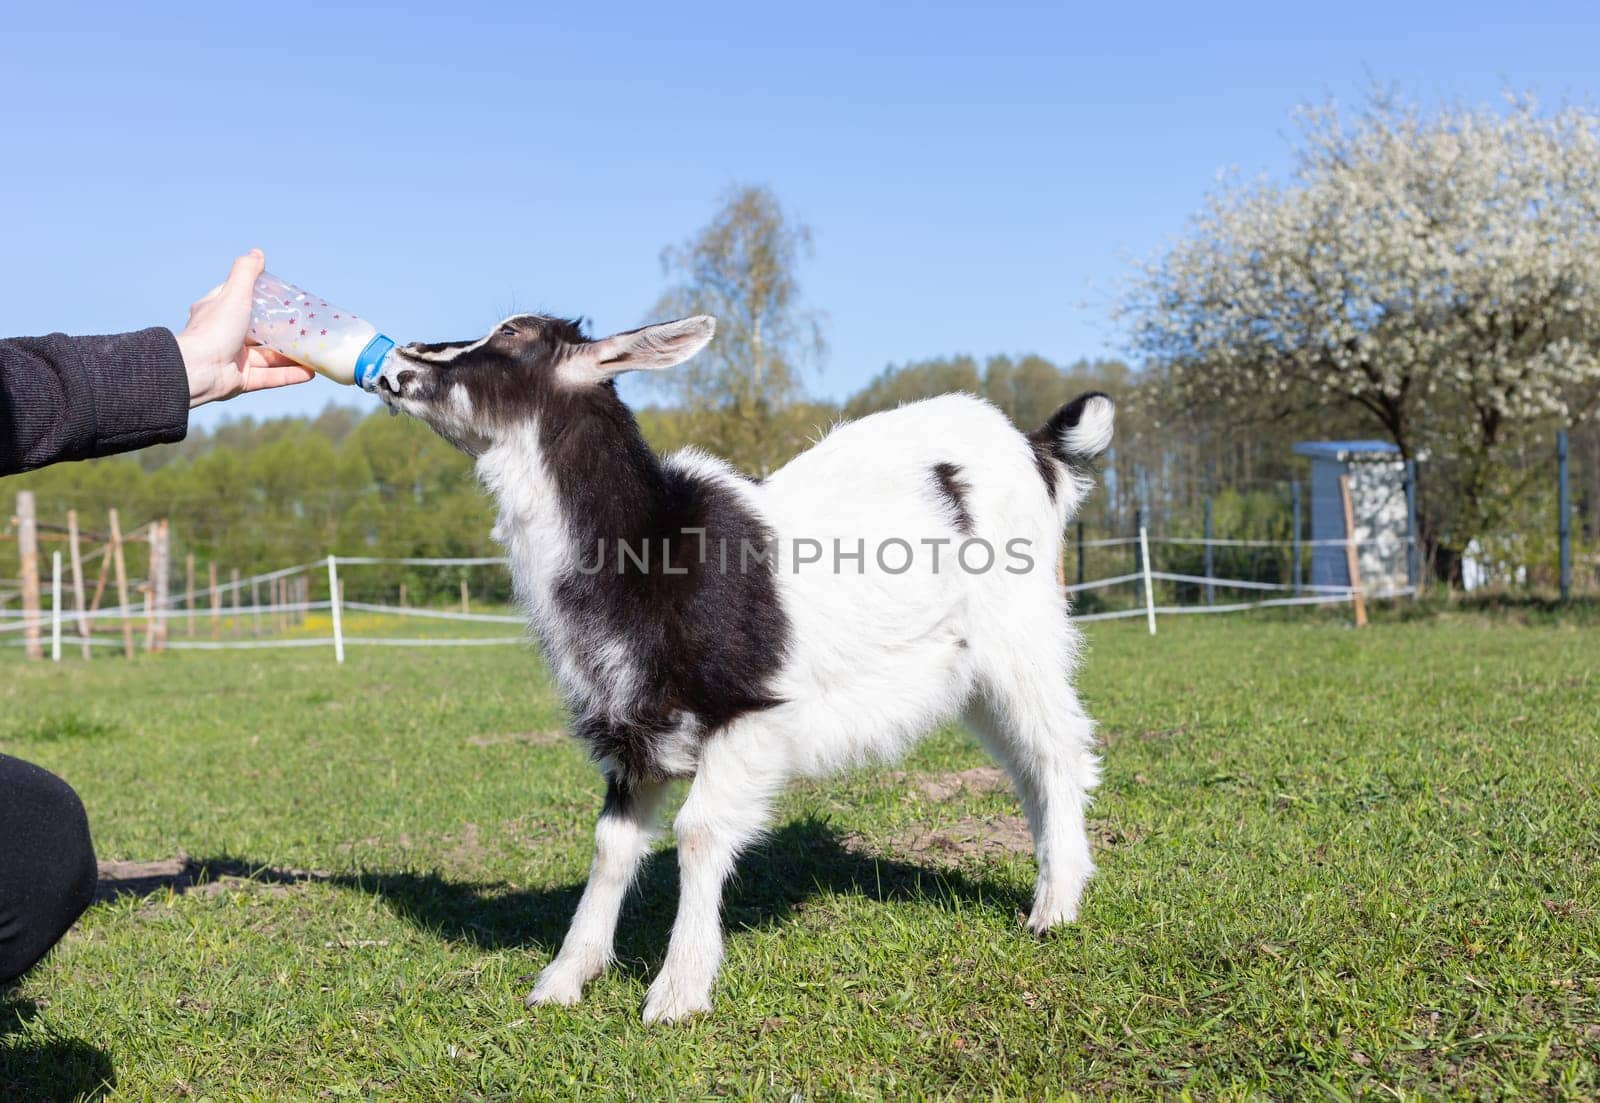 Person Feeding Babies Goat With Milk From Bottle On Farm In Summer Or Spring Time. Domestic Animals Care, Raising. Meadow, Green Blooming Trees On Background. Horizontal Plane. High quality photo